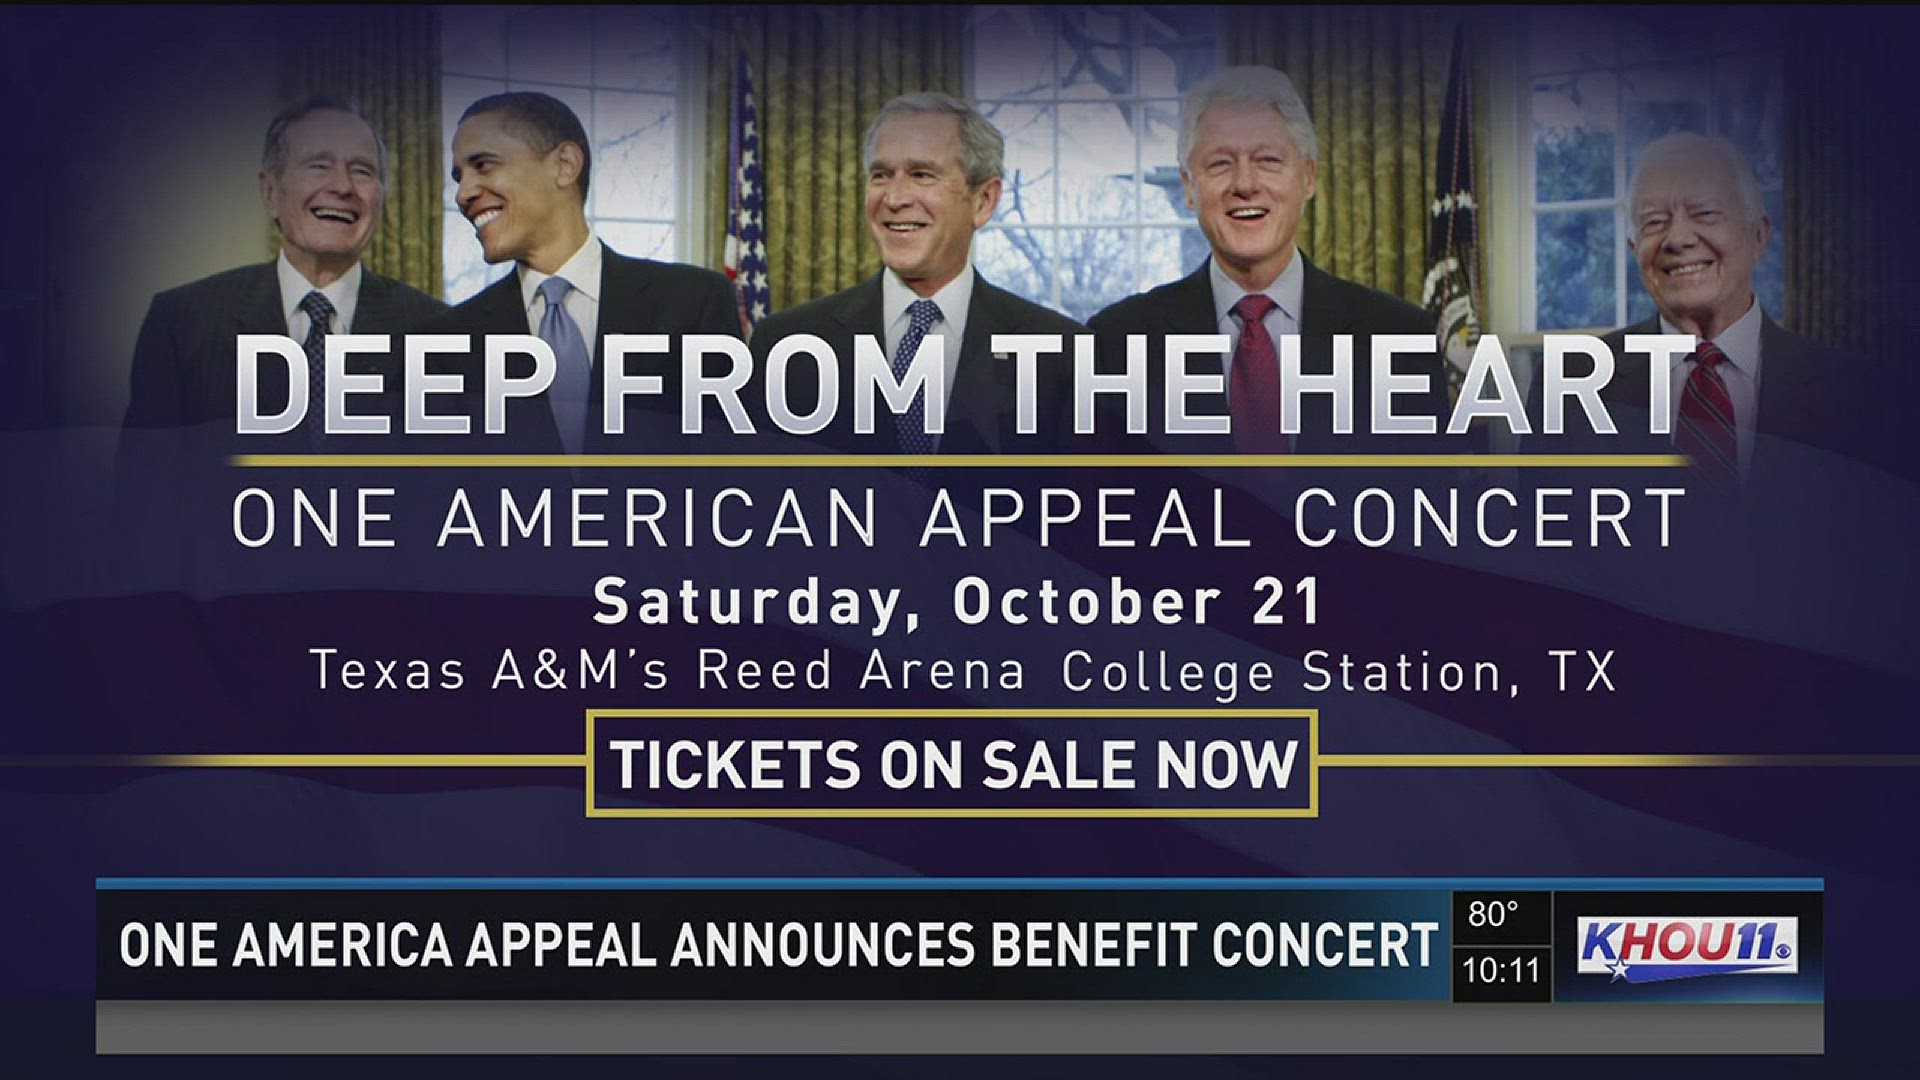 All five living former U.S. presidents will be part of a concert later this month to benefit hurricane relief efforts.